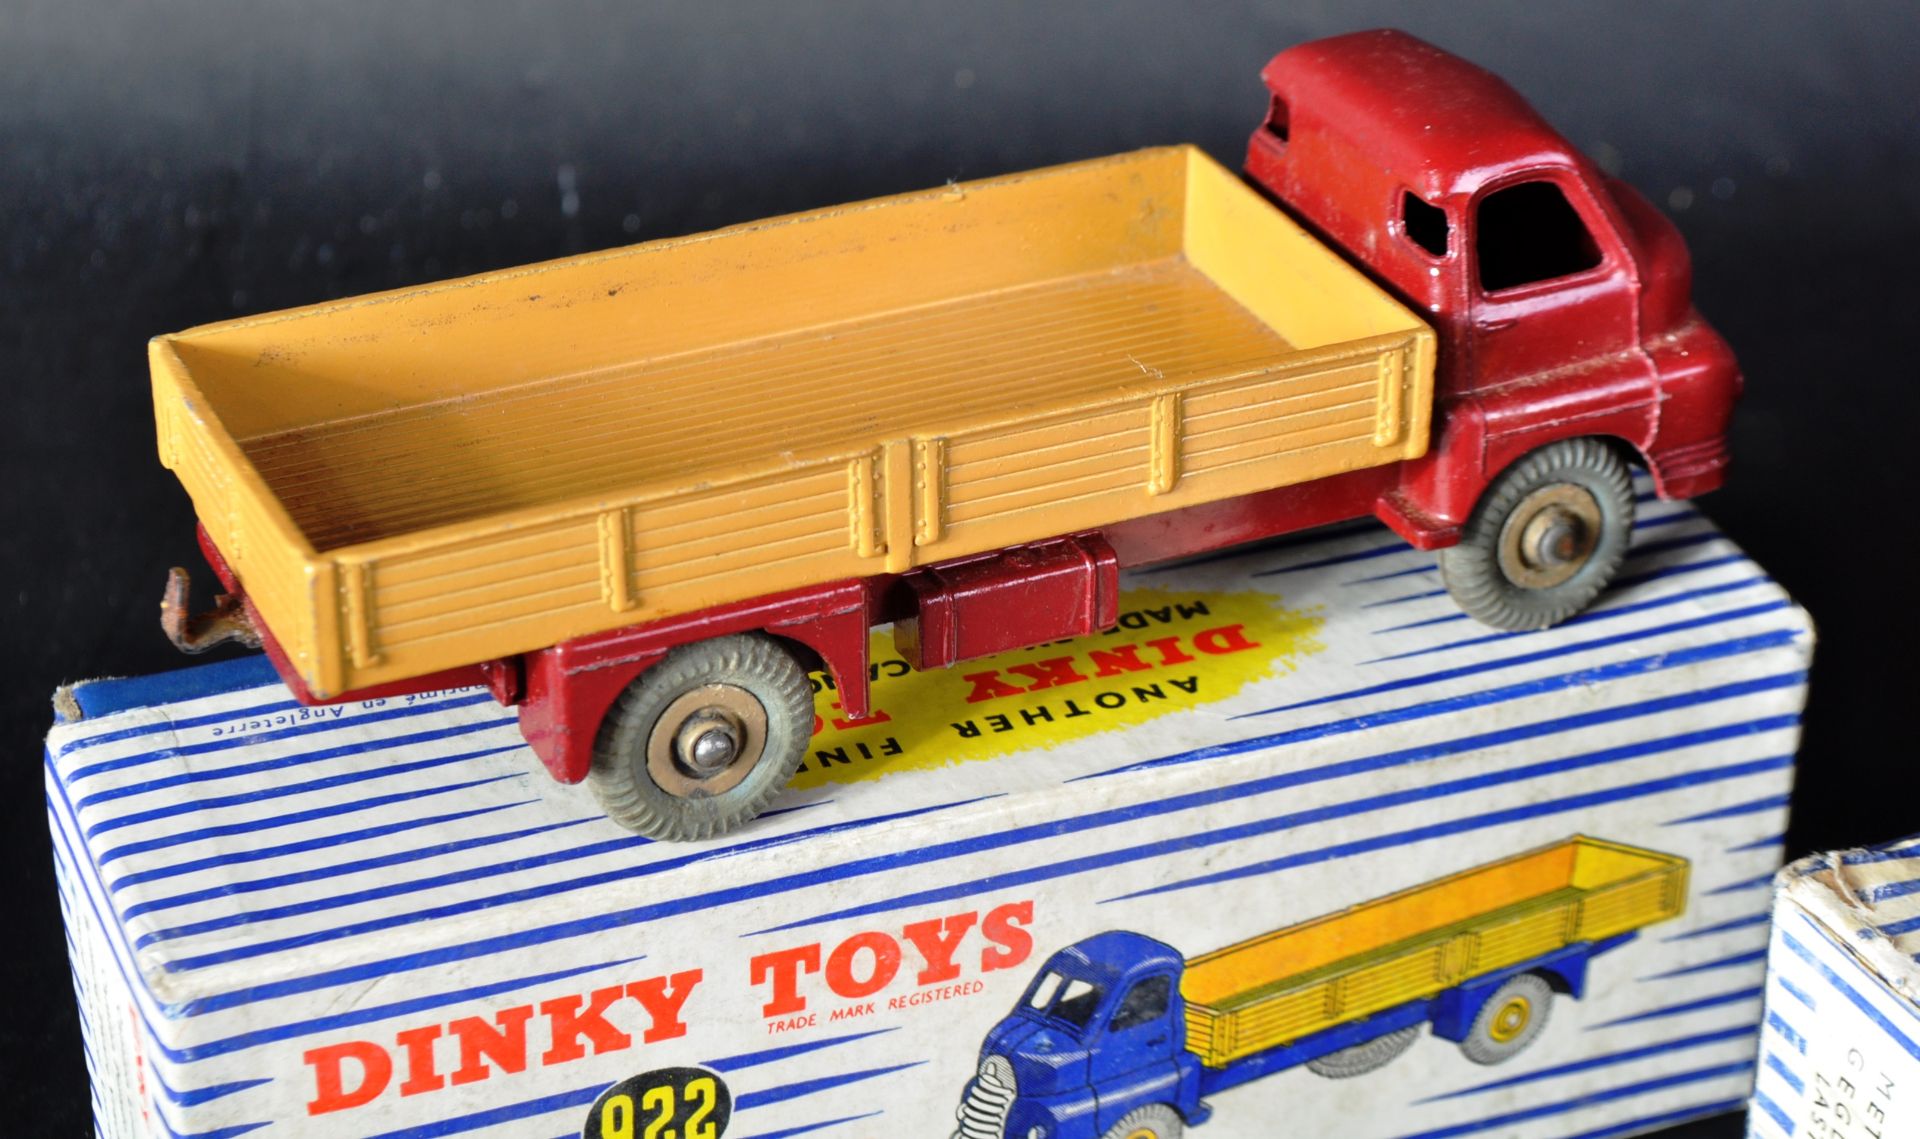 TWO VINTAGE DINKY TOYS BOXED DIECAST MODEL TRUCKS - Image 8 of 8